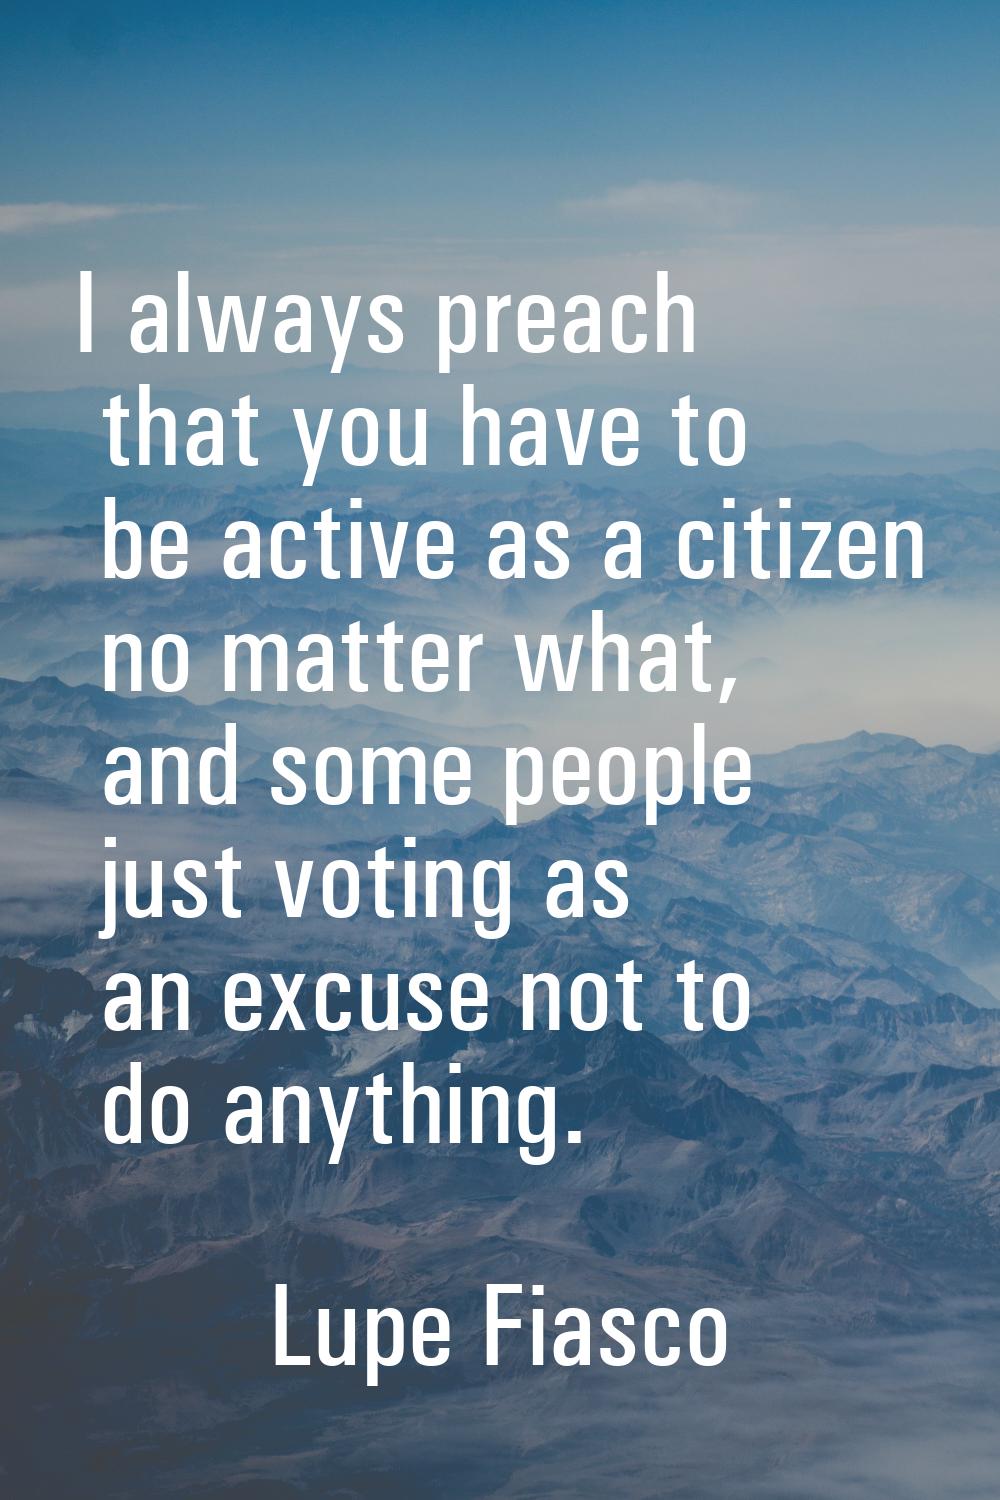 I always preach that you have to be active as a citizen no matter what, and some people just voting